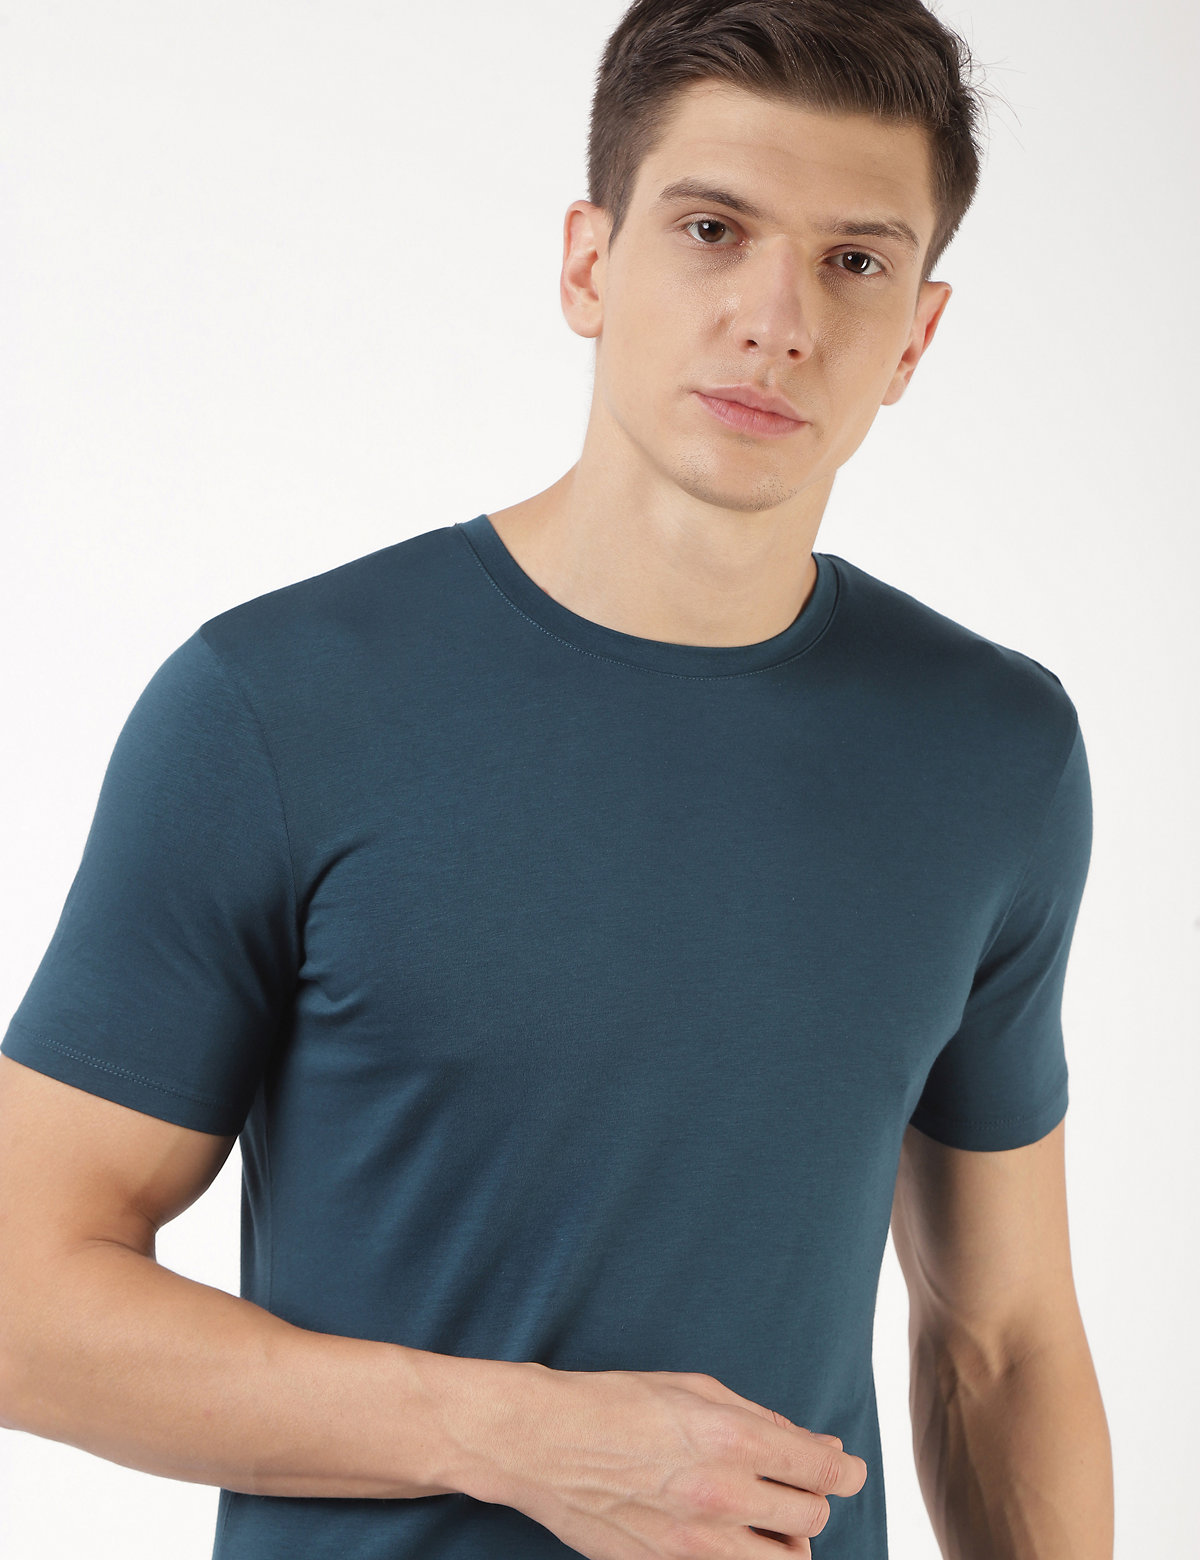 Cotton-Blend Solid Pull-On T-Shirt